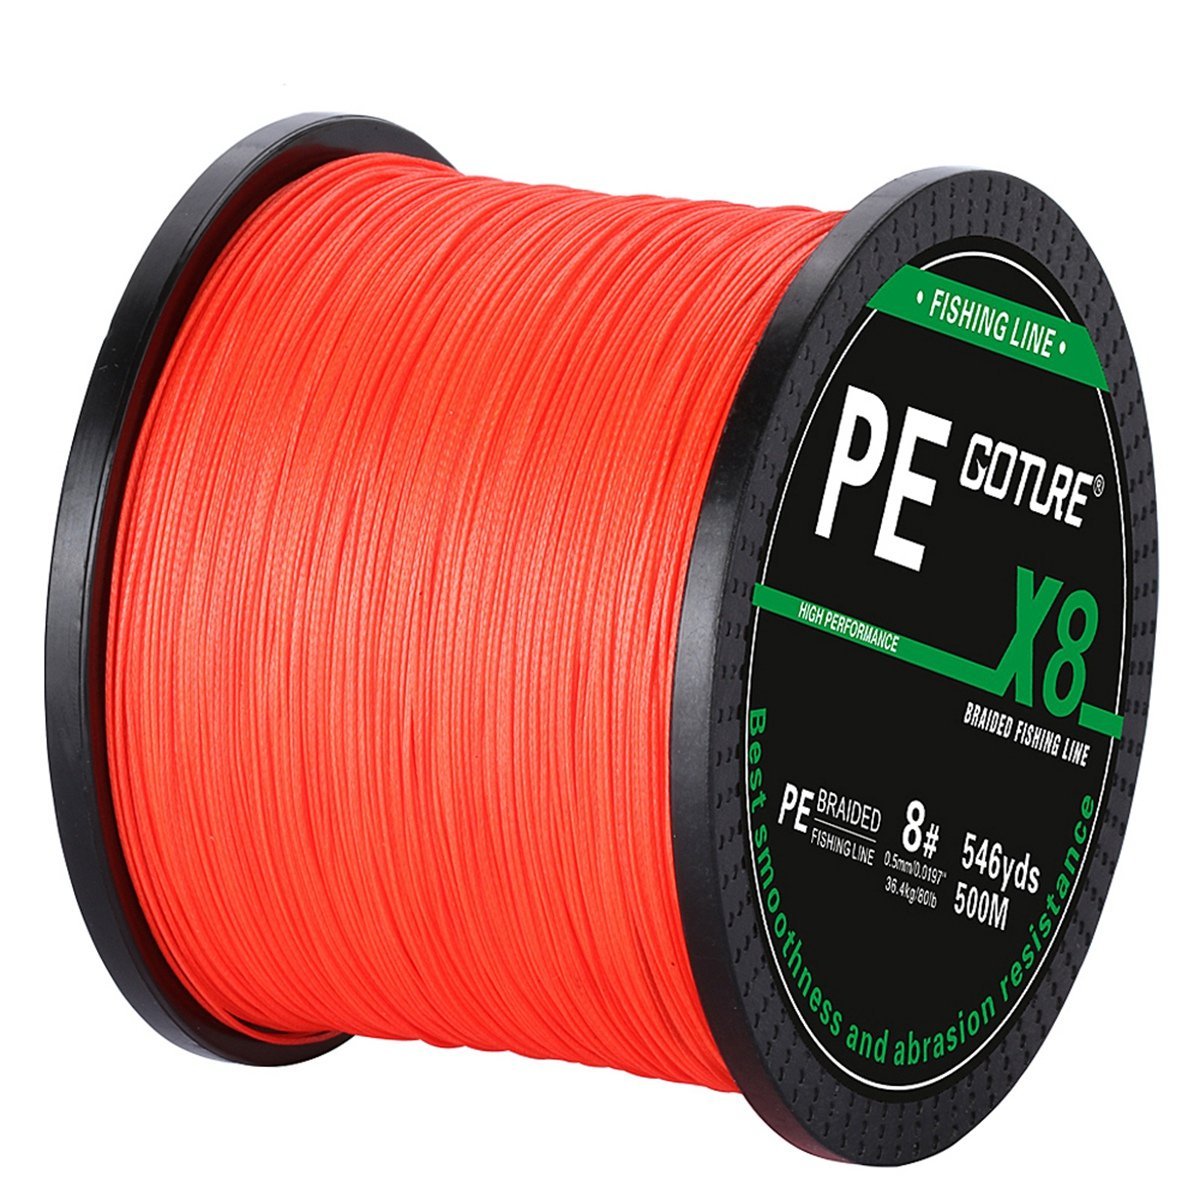 DORISEA Saratoga 8 Strand Braided Fishing Line Fishing Line Top Quality PE  Multifunctional Fish Wire In 5 Sizes 500m, 6LB 300lb From Ren05, $16.65